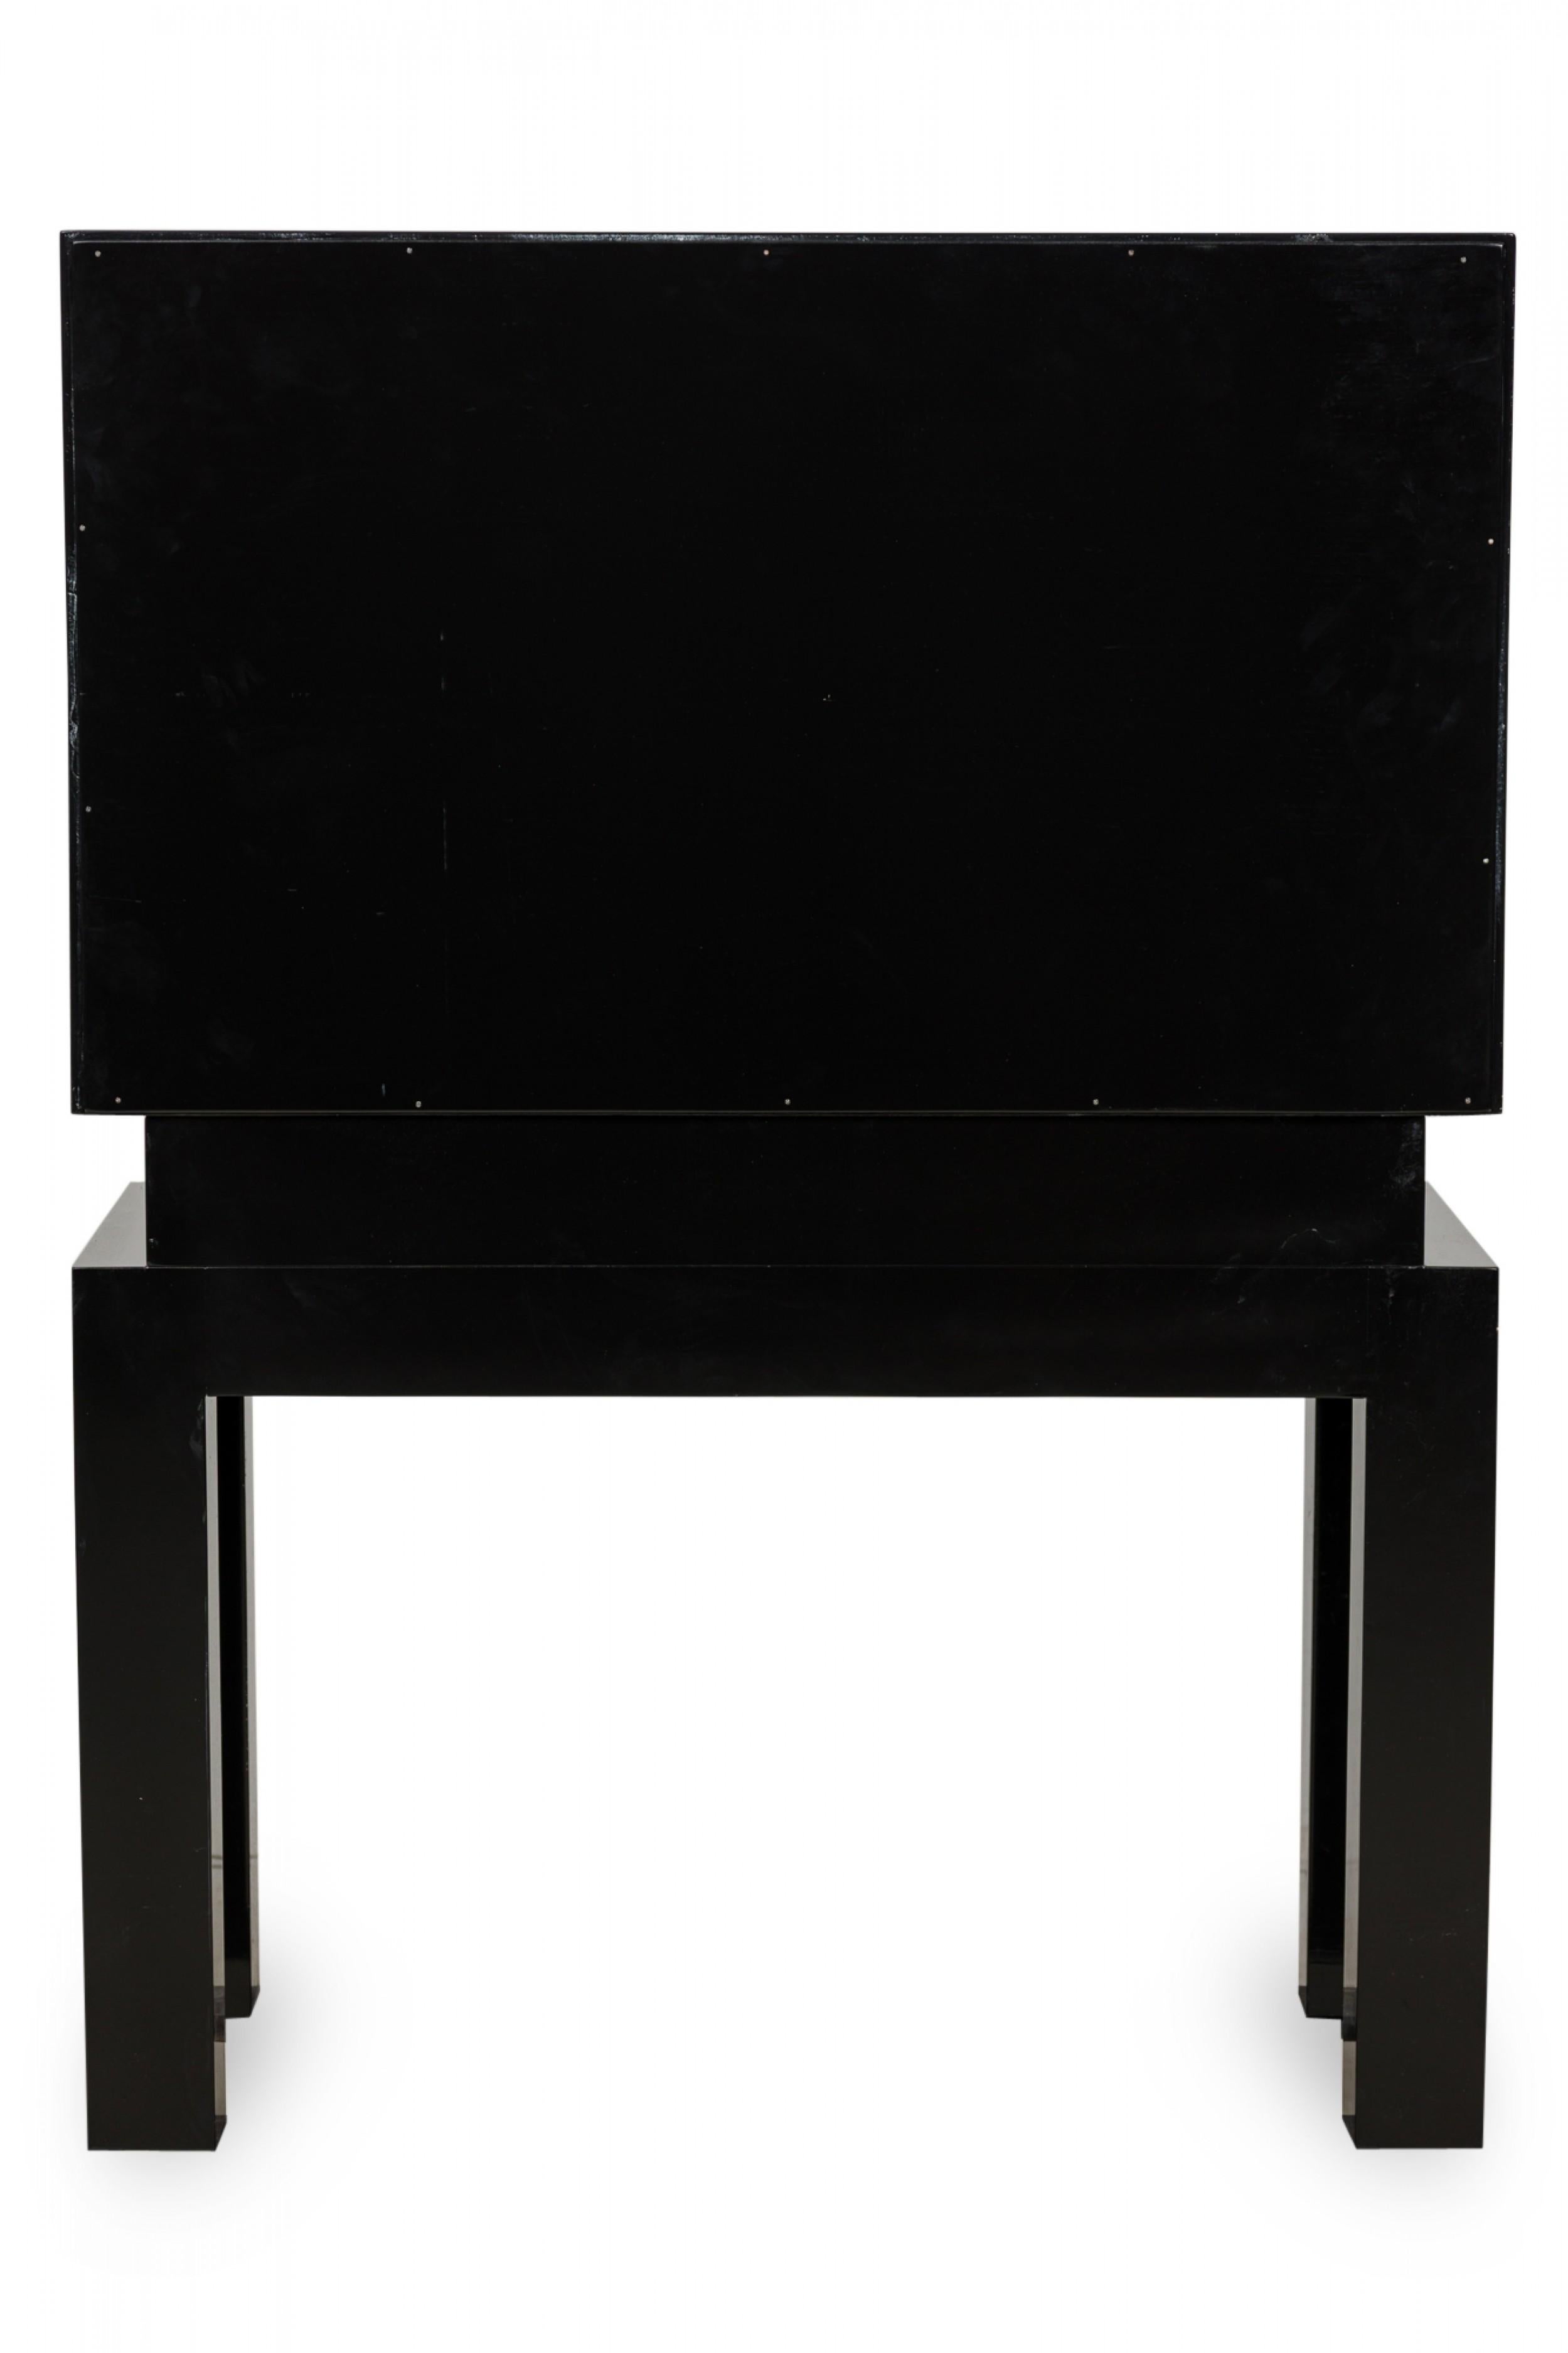 20th Century Tommi Parzinger Midcentury American Modern Black Lacquered Bar Cabinet For Sale